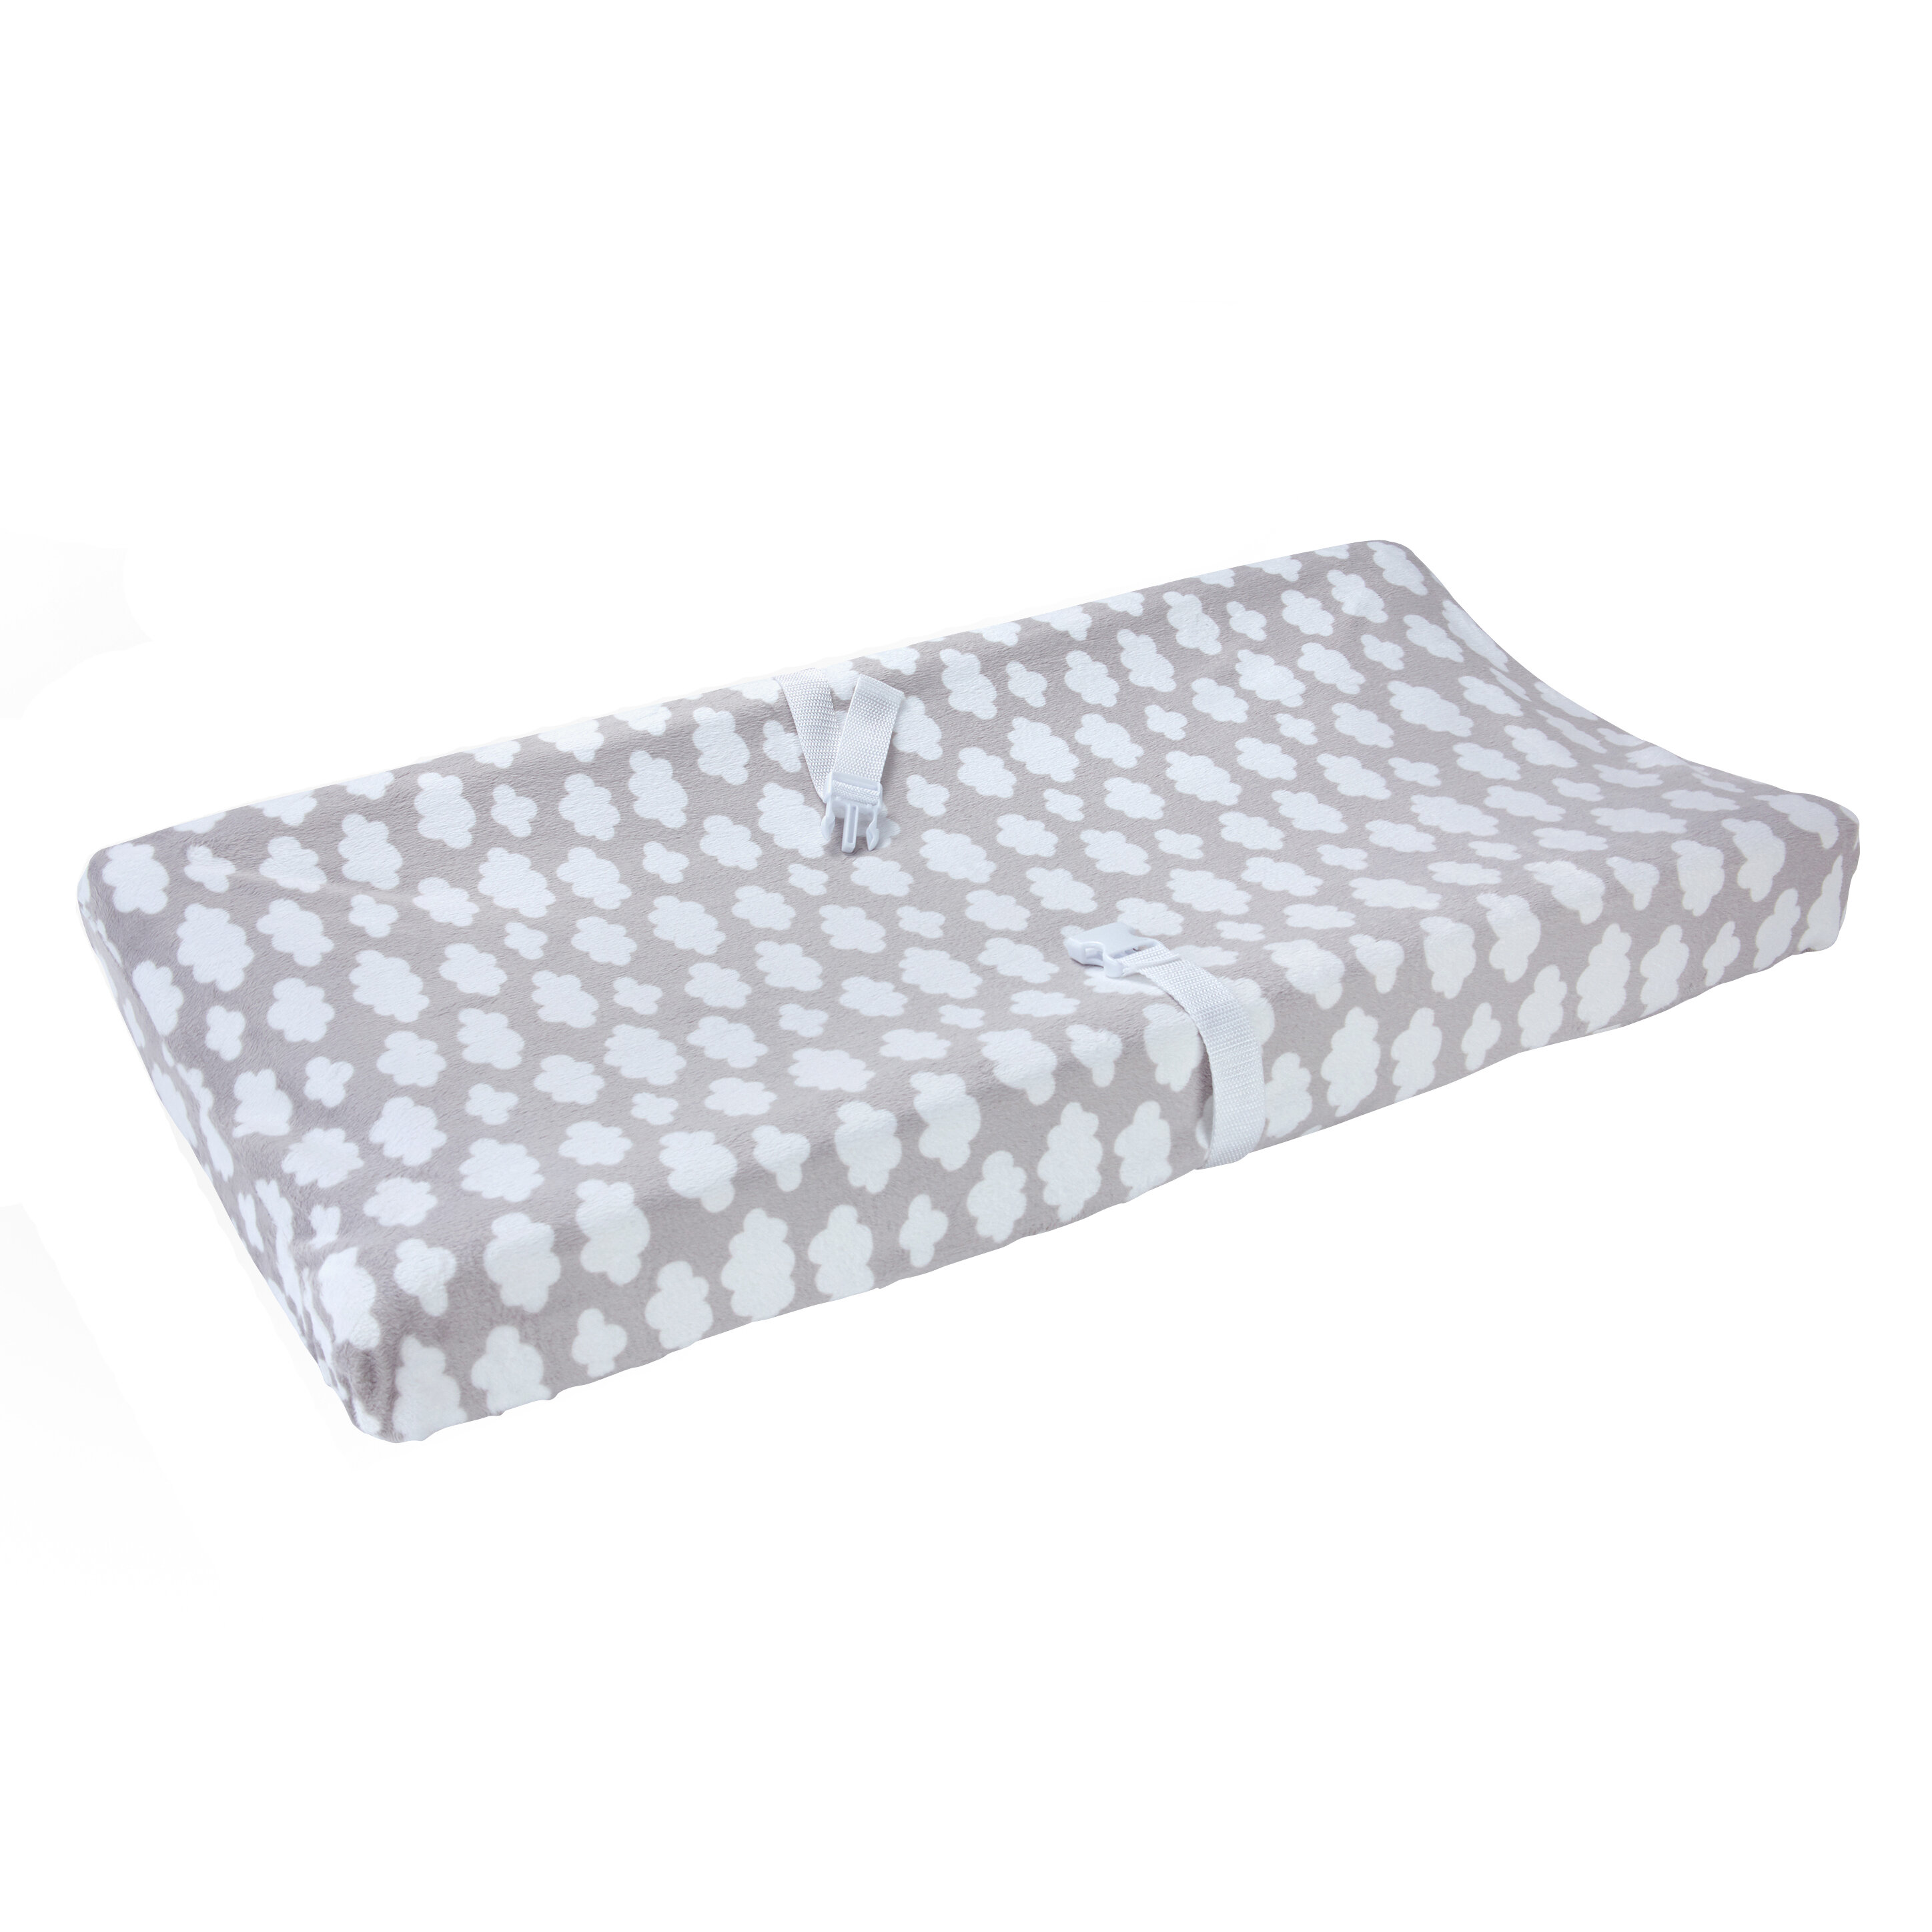 Cloud Island Gold Dots /New Plush Changing Pad Cover Floral